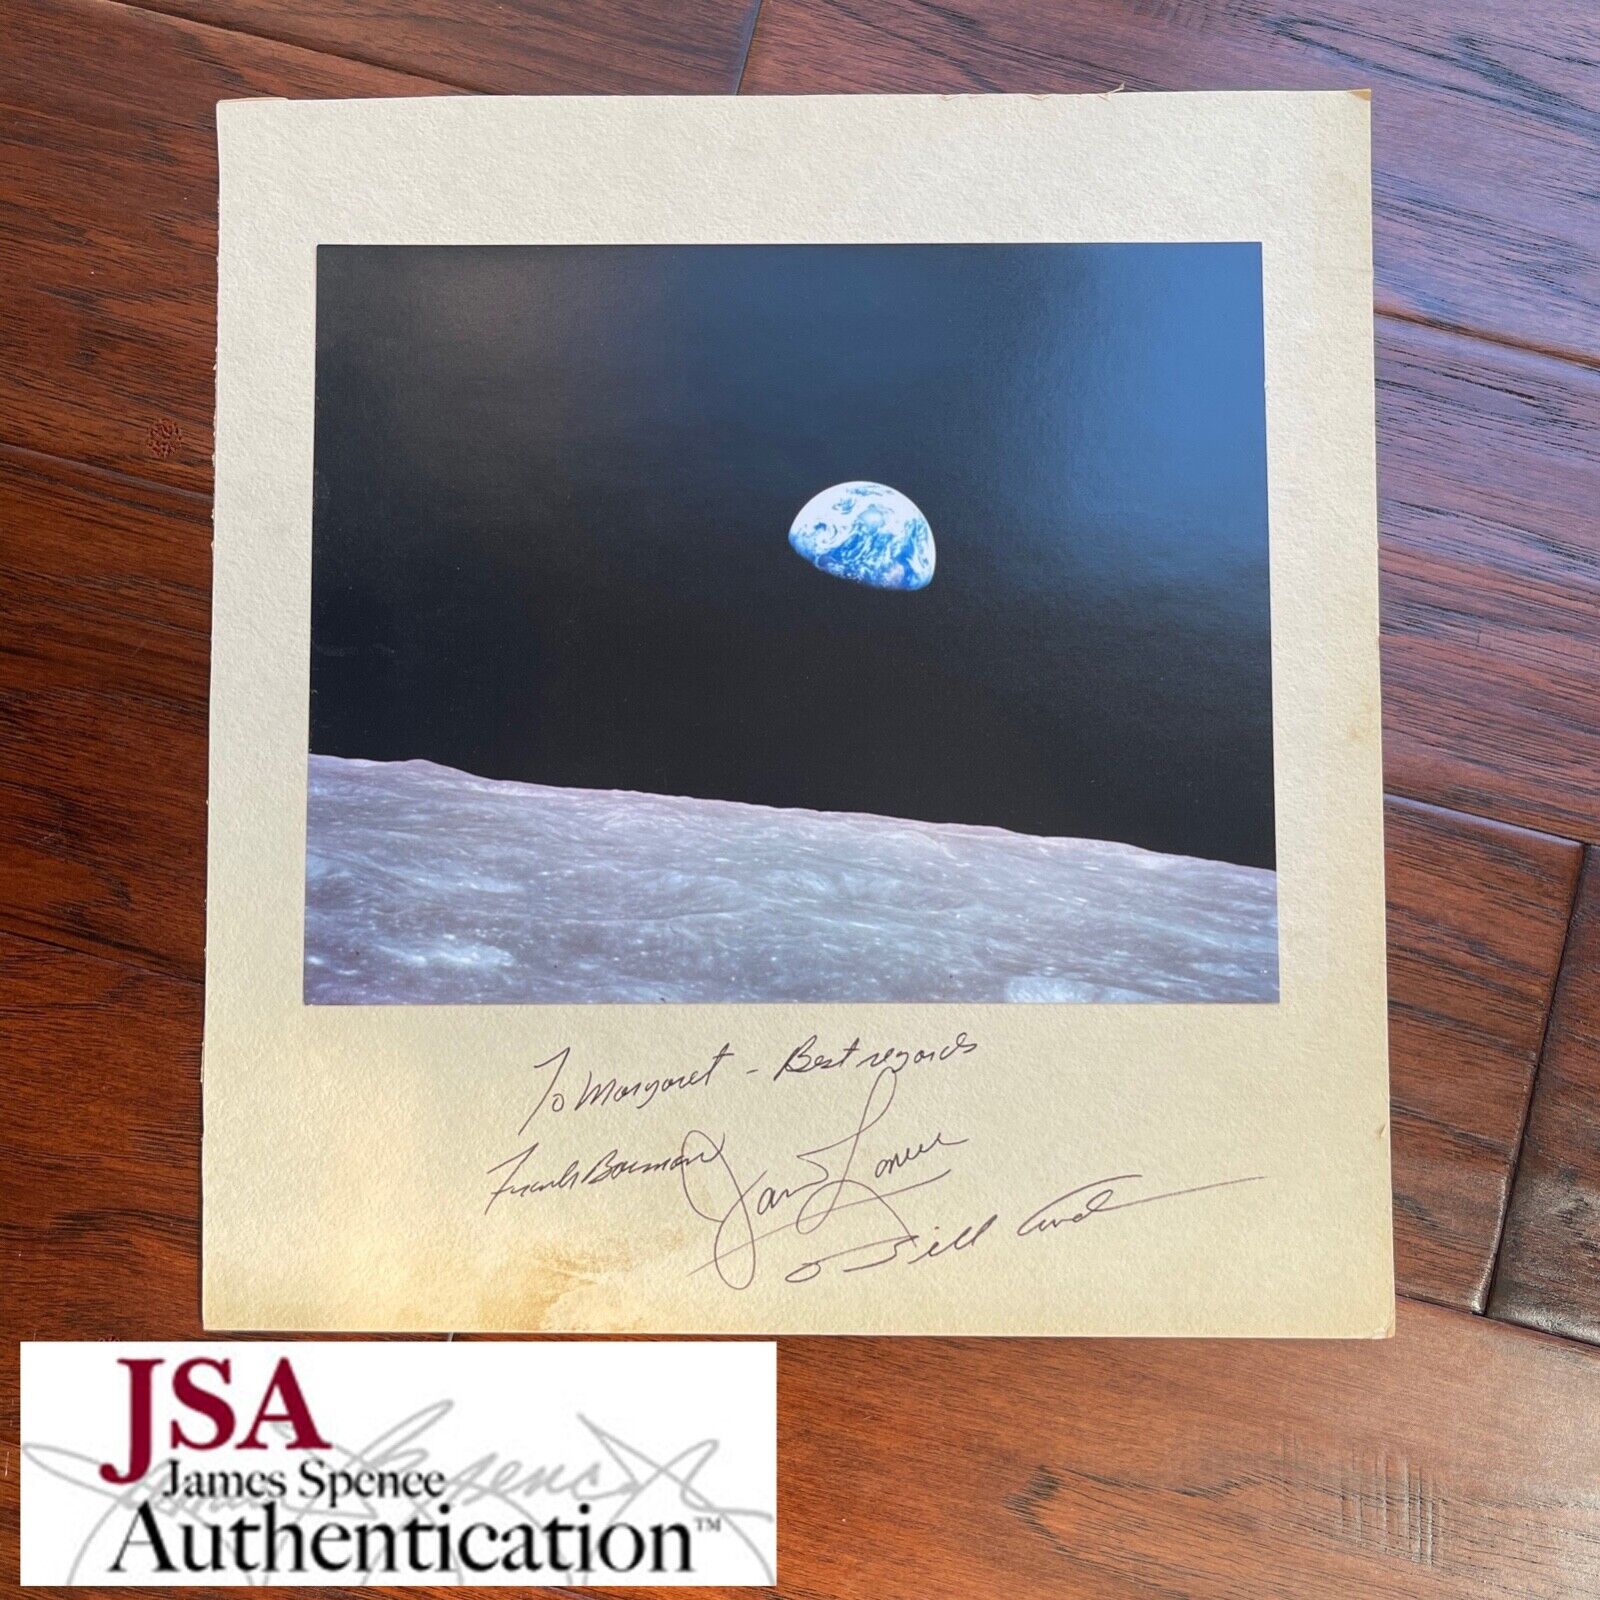 APOLLO 8 CREW SIGNED * JSA * WILLIAM BILL ANDERS LOVELL * Autograph EARTHRISE